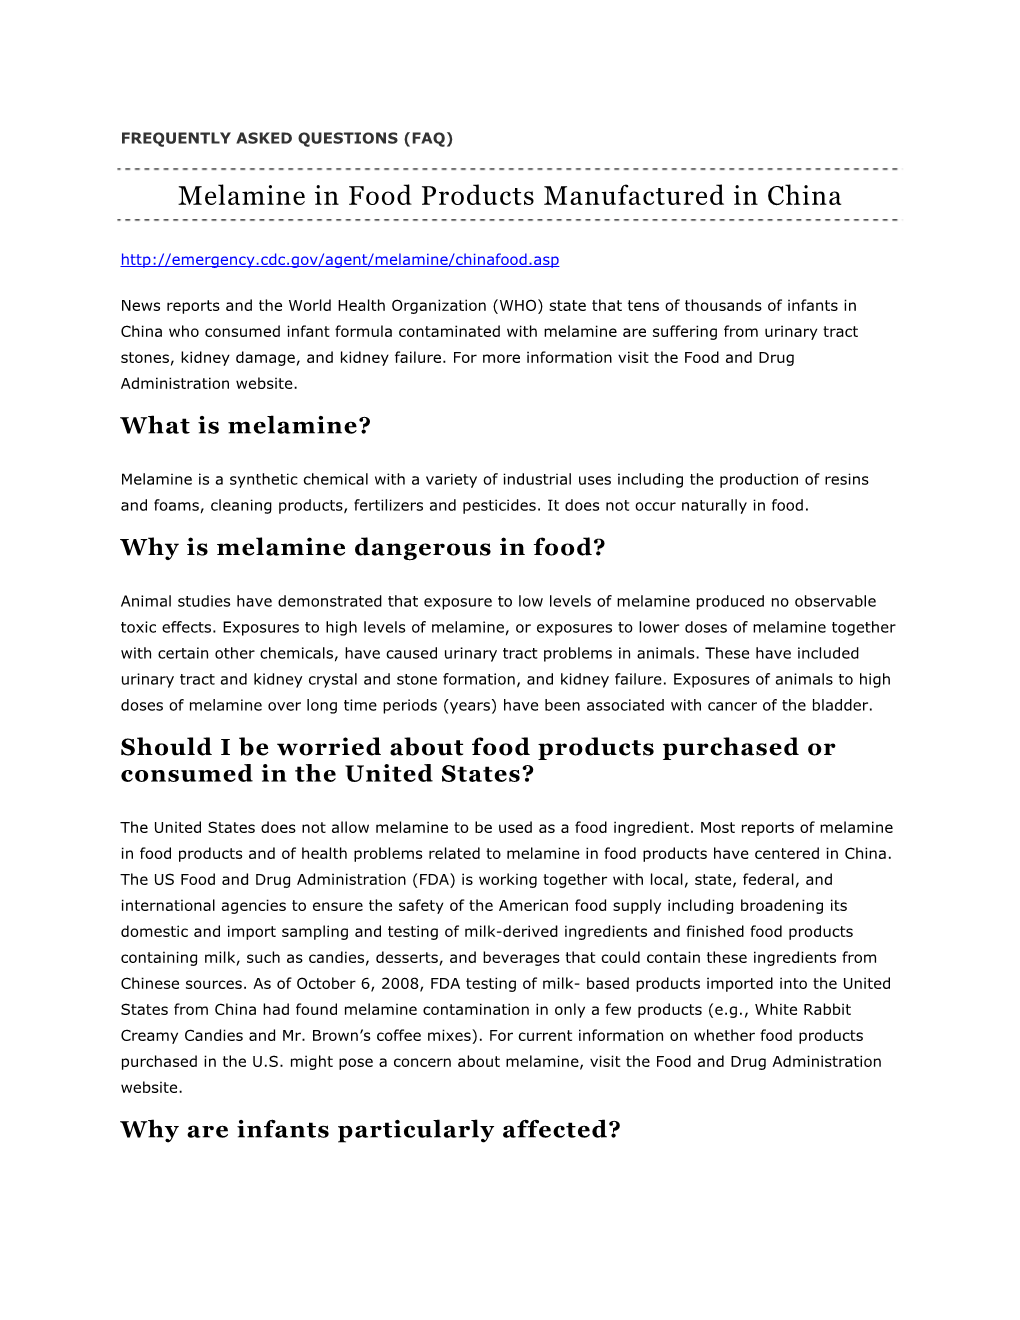 Melamine in Food Products Manufactured in China